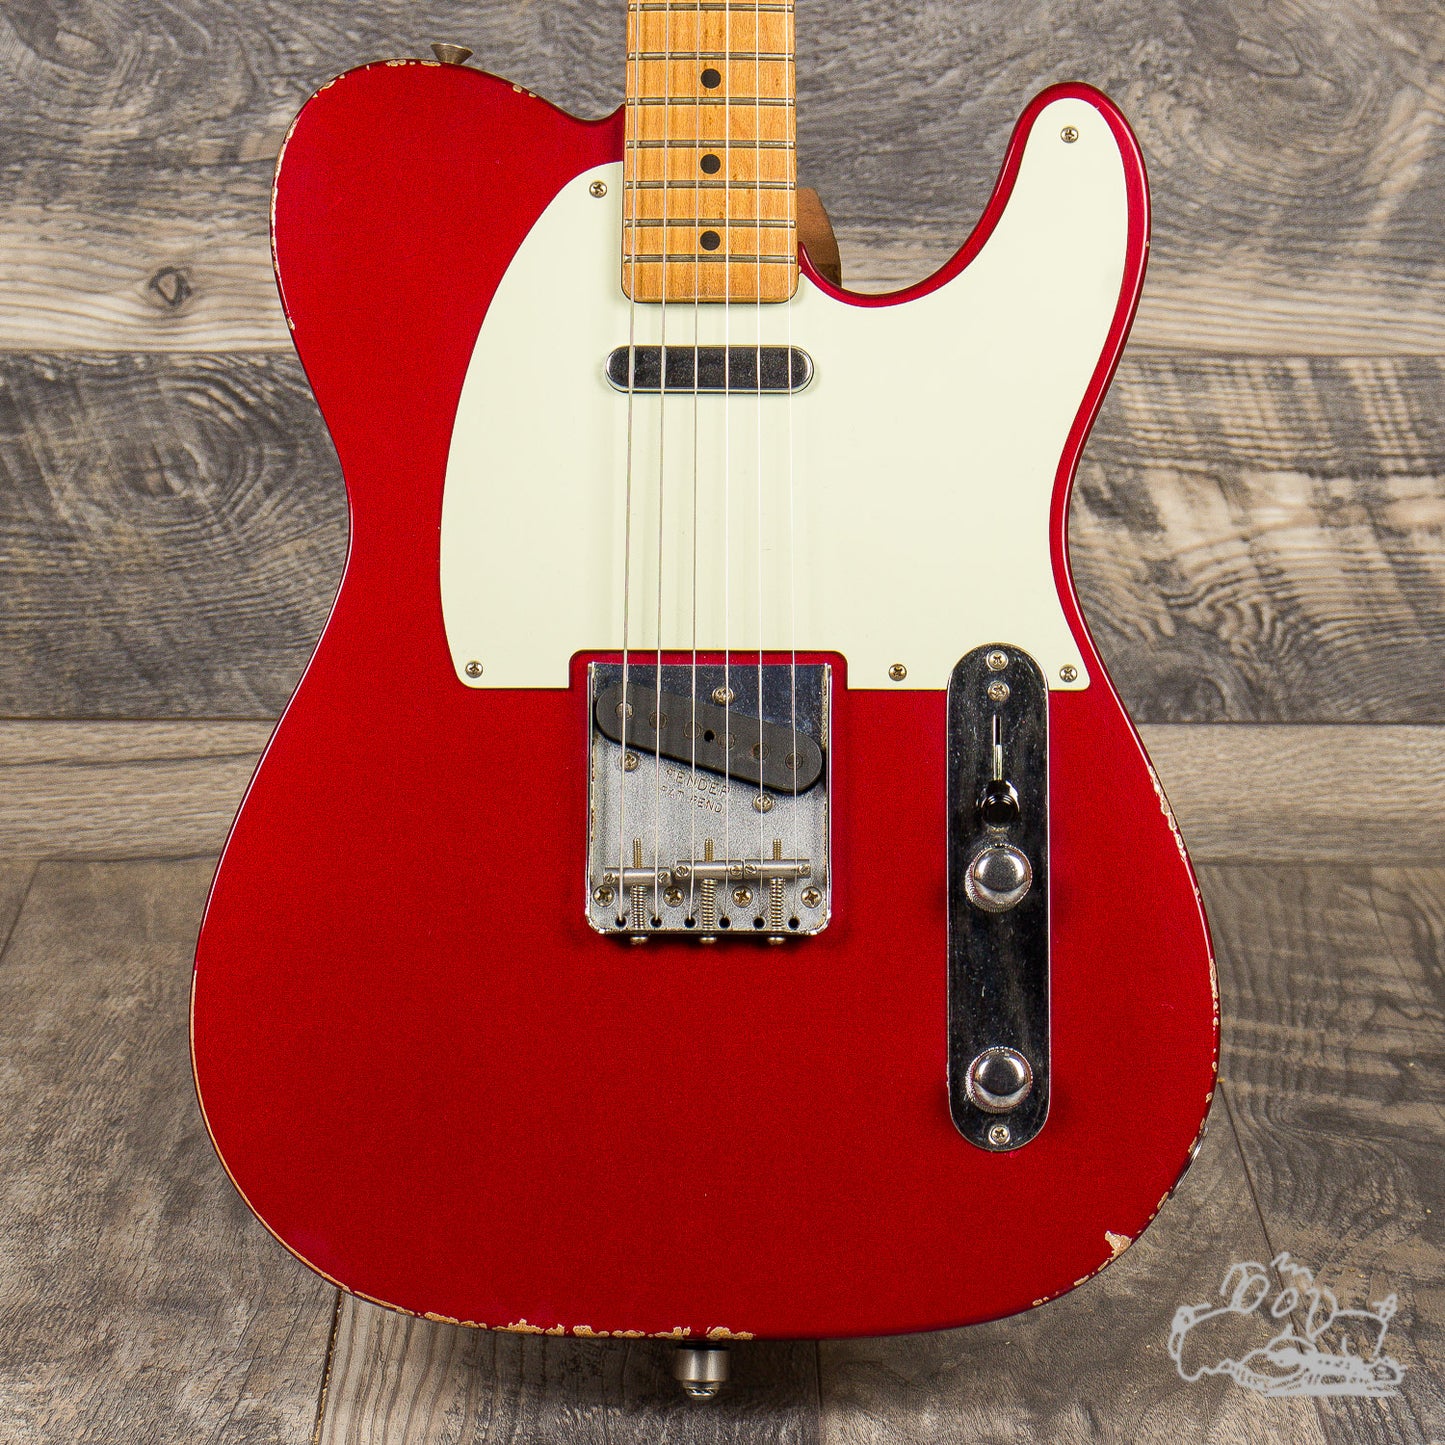 2018 Fender Road Worn Telecaster Special Edition - Candy Apple Red